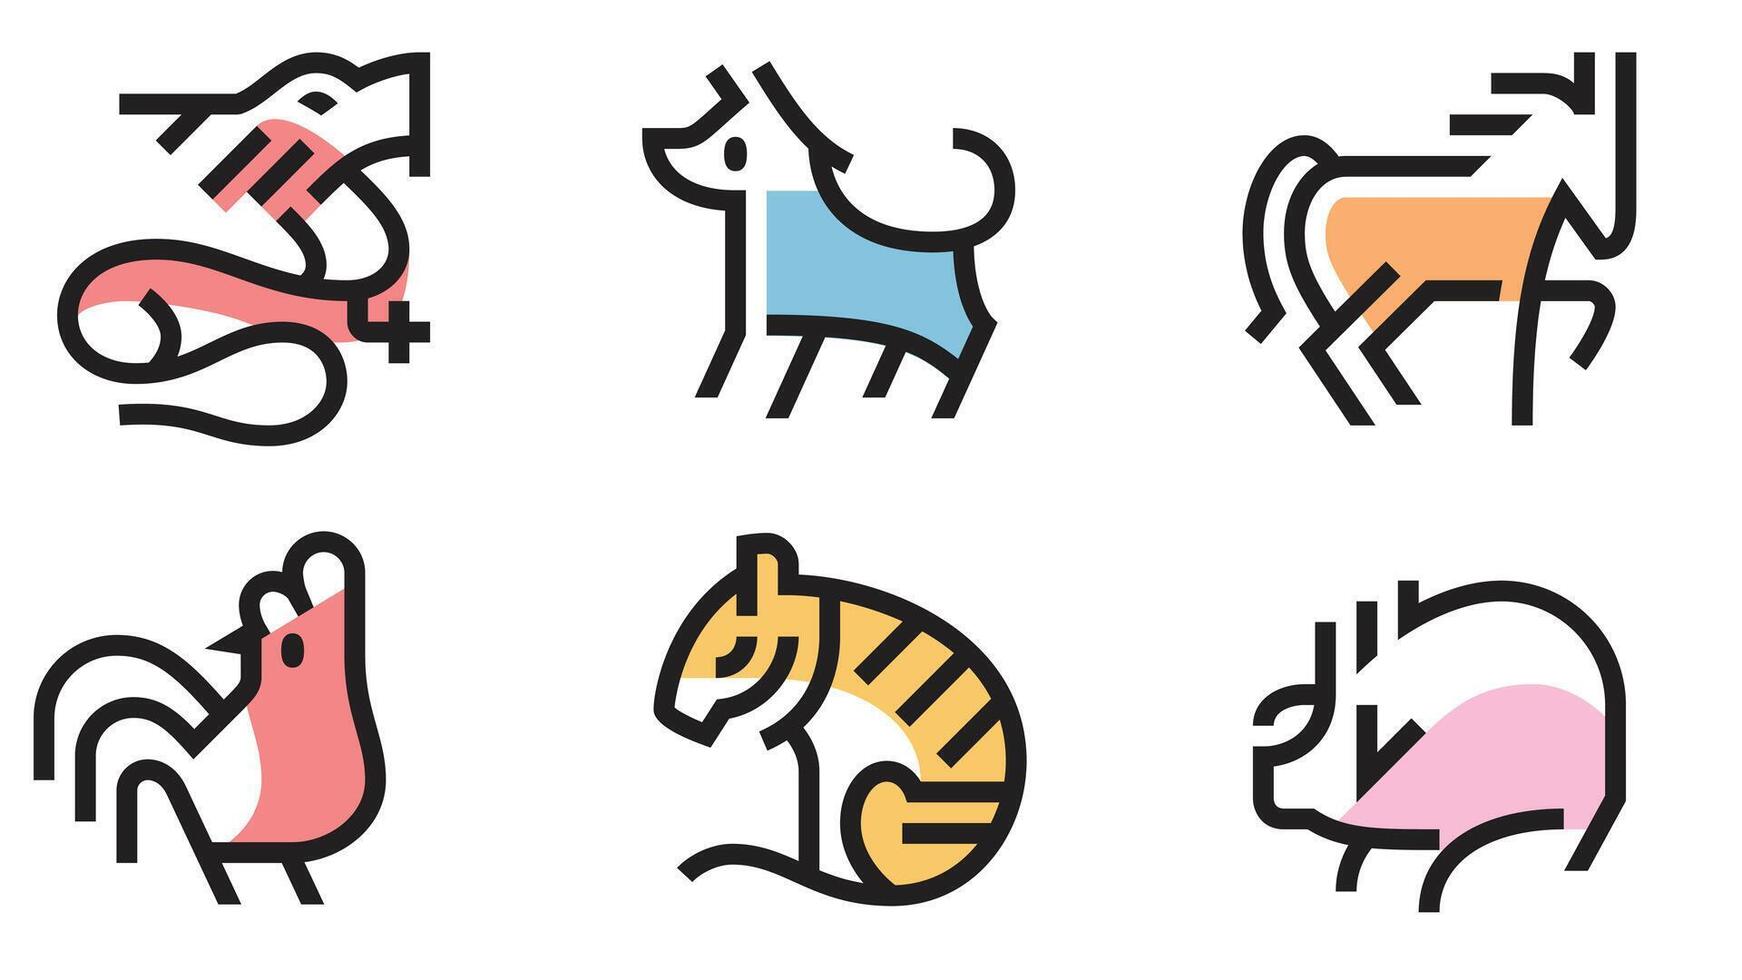 Chinese culture signs and symbols vector icon set